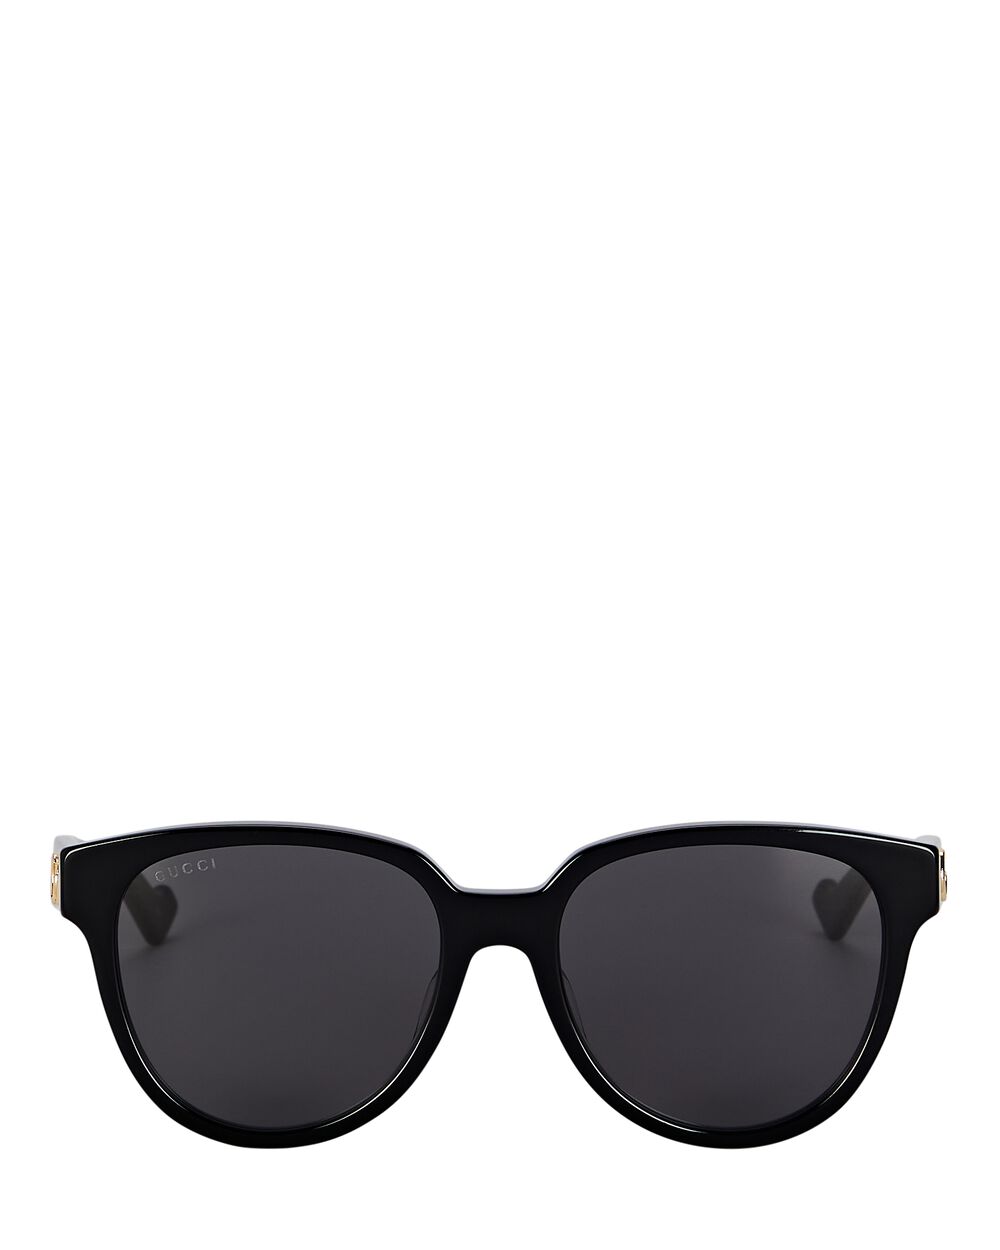 Gucci Oversized Cat Eye Sunglasses with Gold Frame